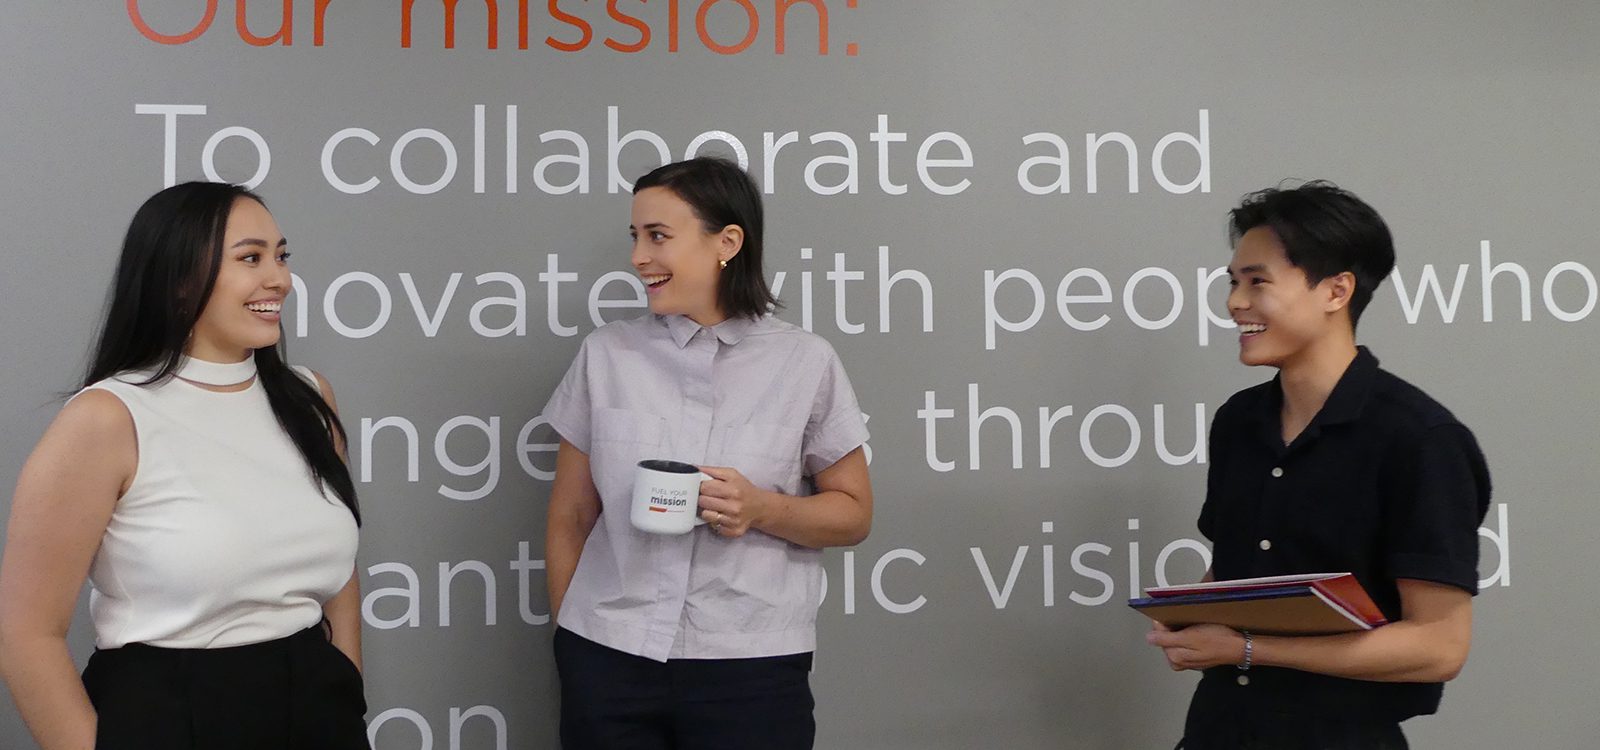 Three people standing in front of a mission statement and smiling